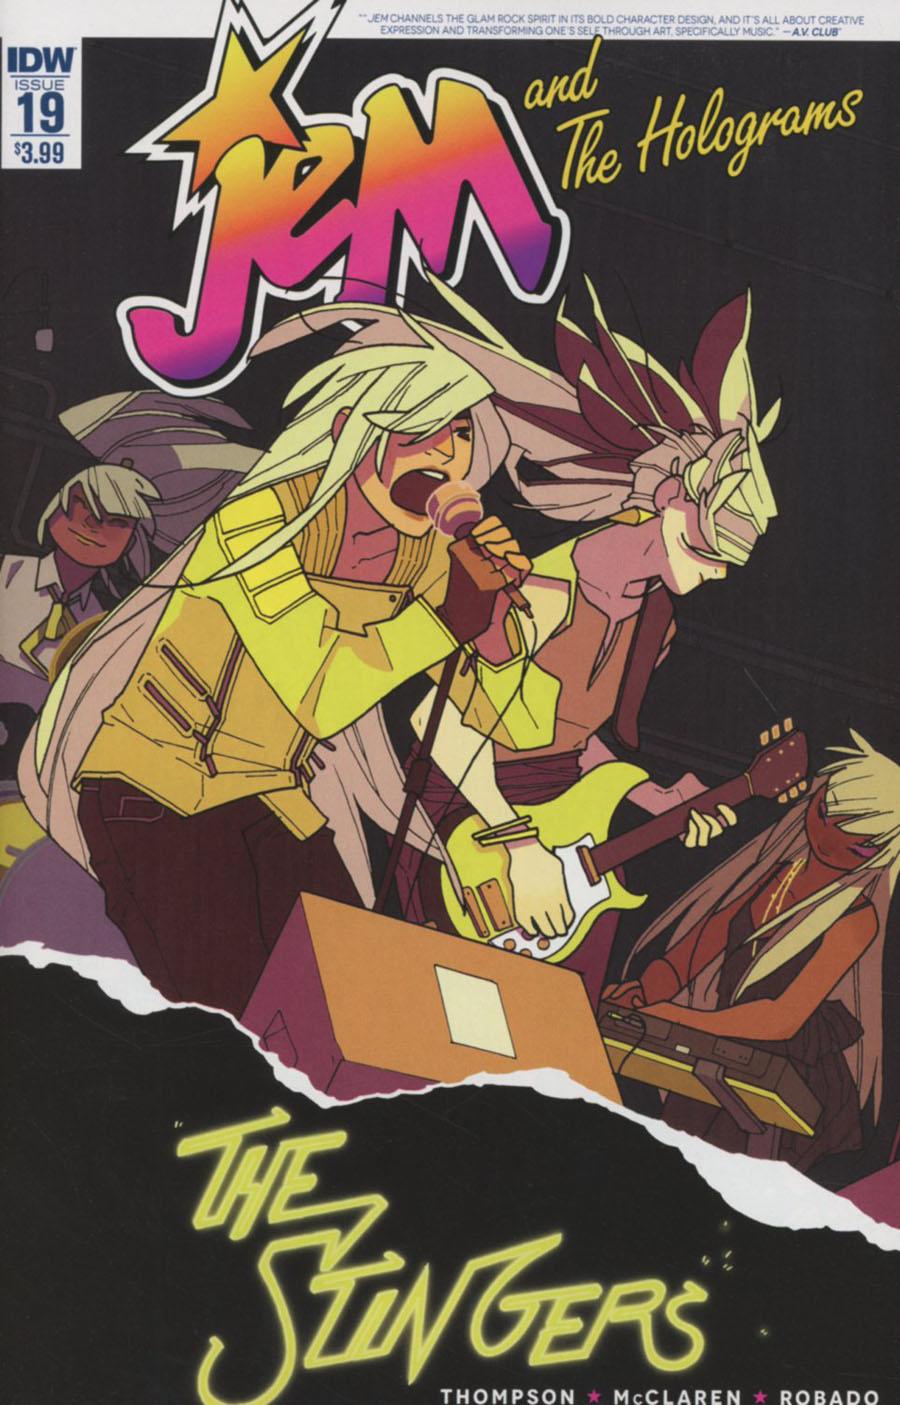 Jem And The Holograms Vol. 1 #19